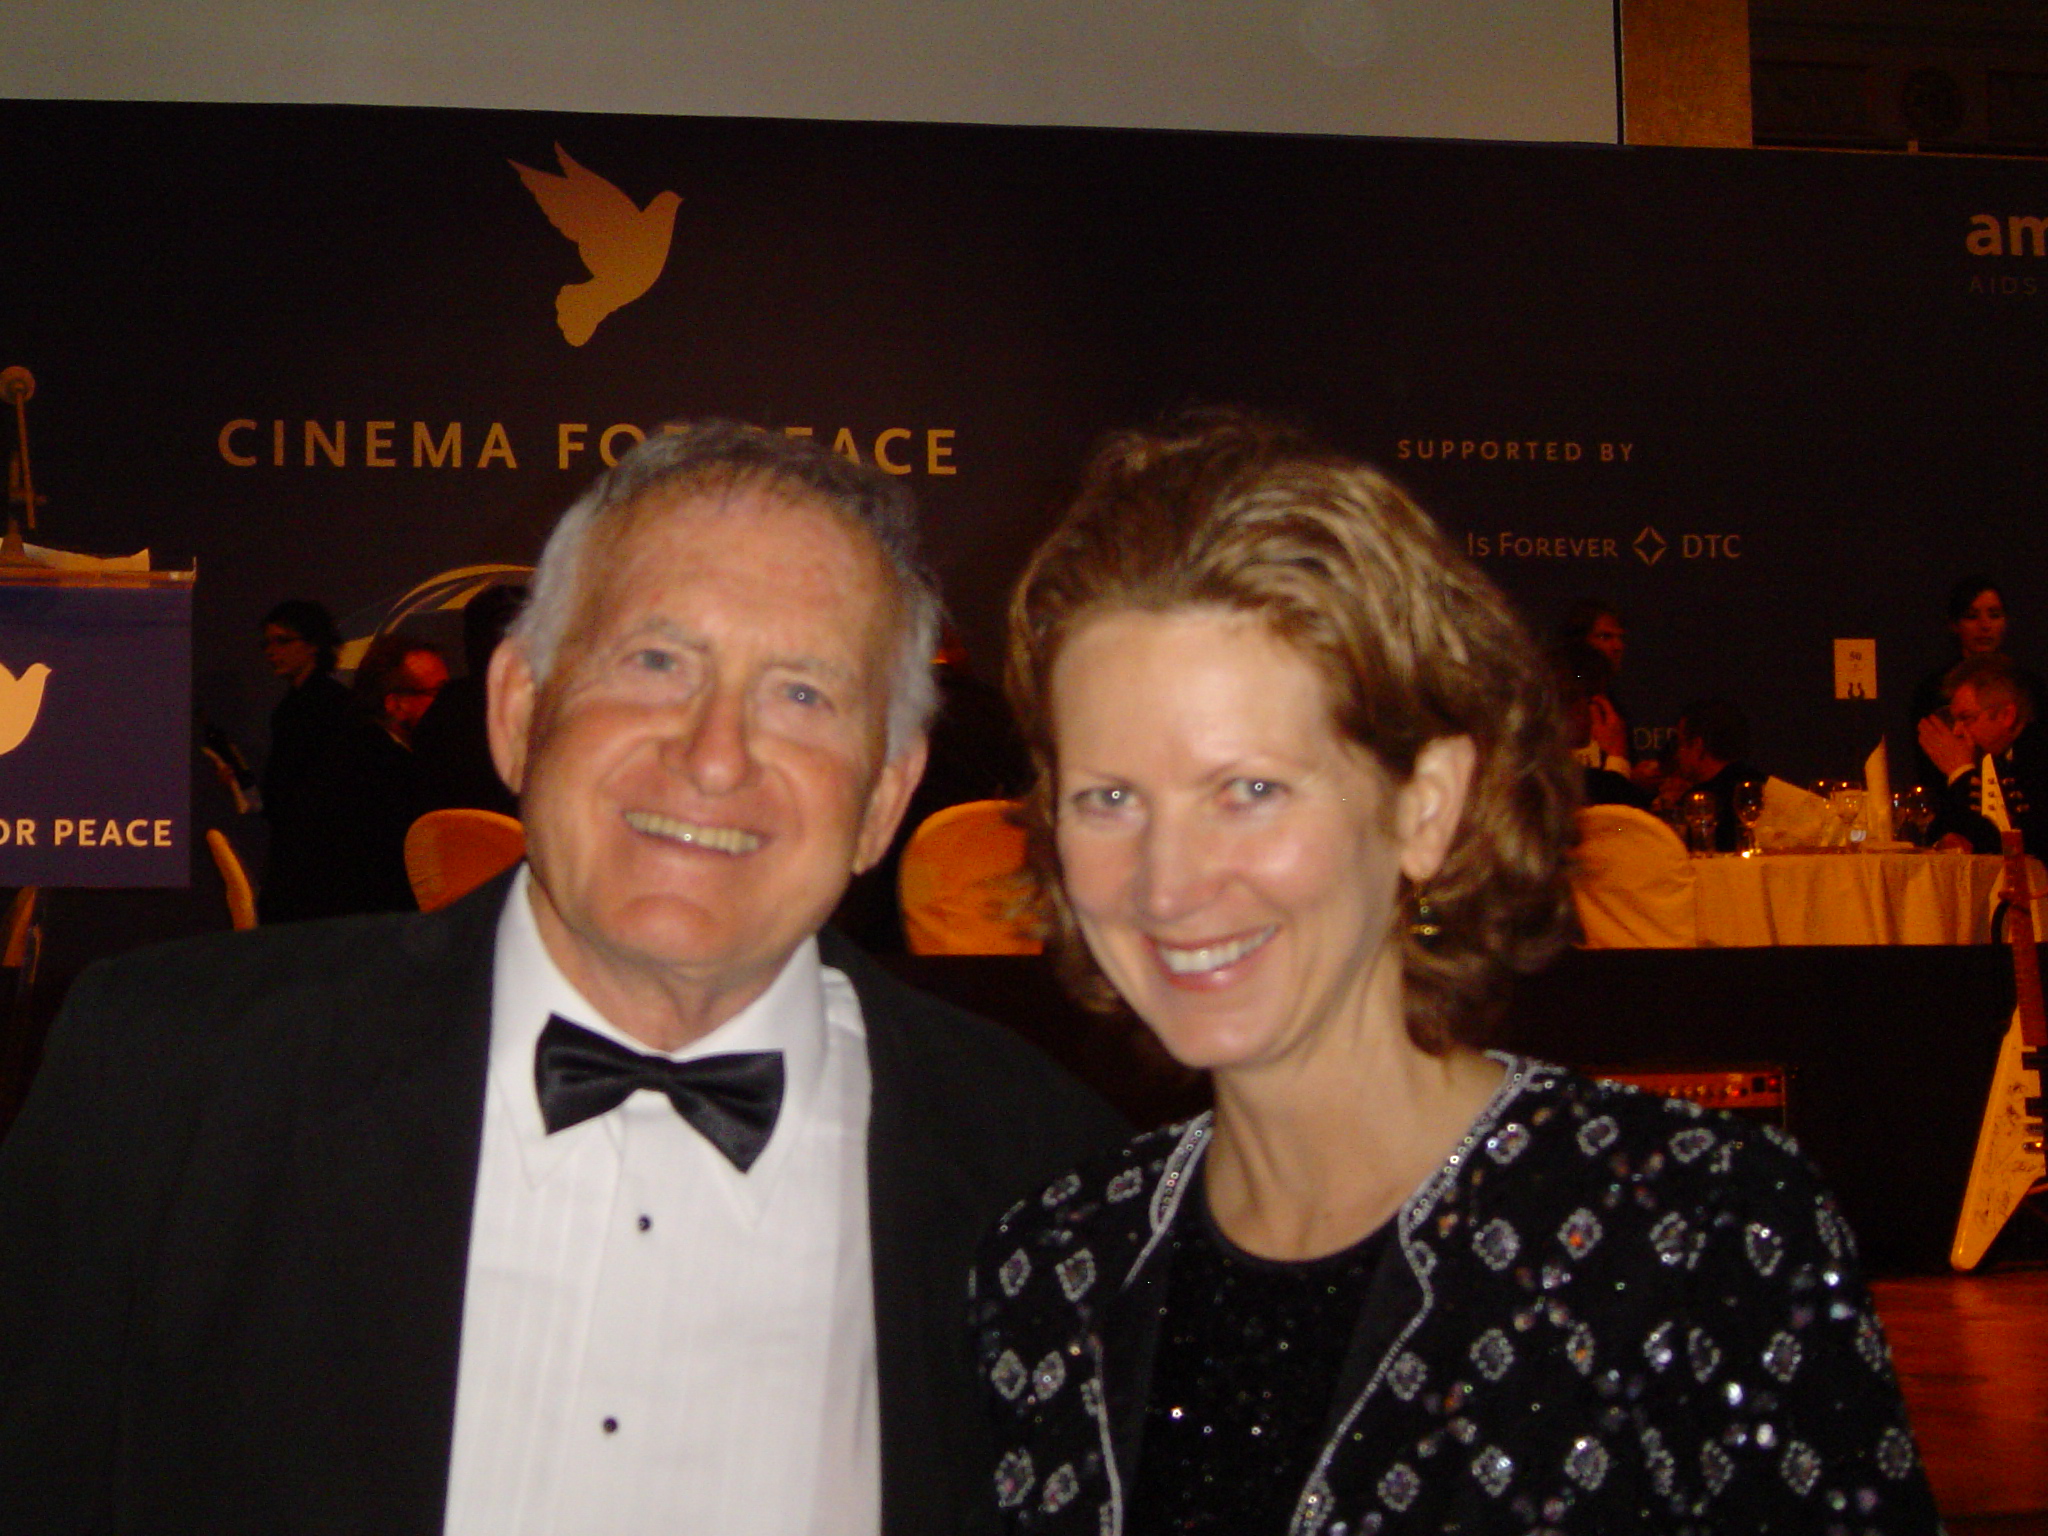 Robert Chartoff and Lynn Hendee, Berlin Film Festival, accepting Diamond Cinema for Peace Award for 'In My Country'